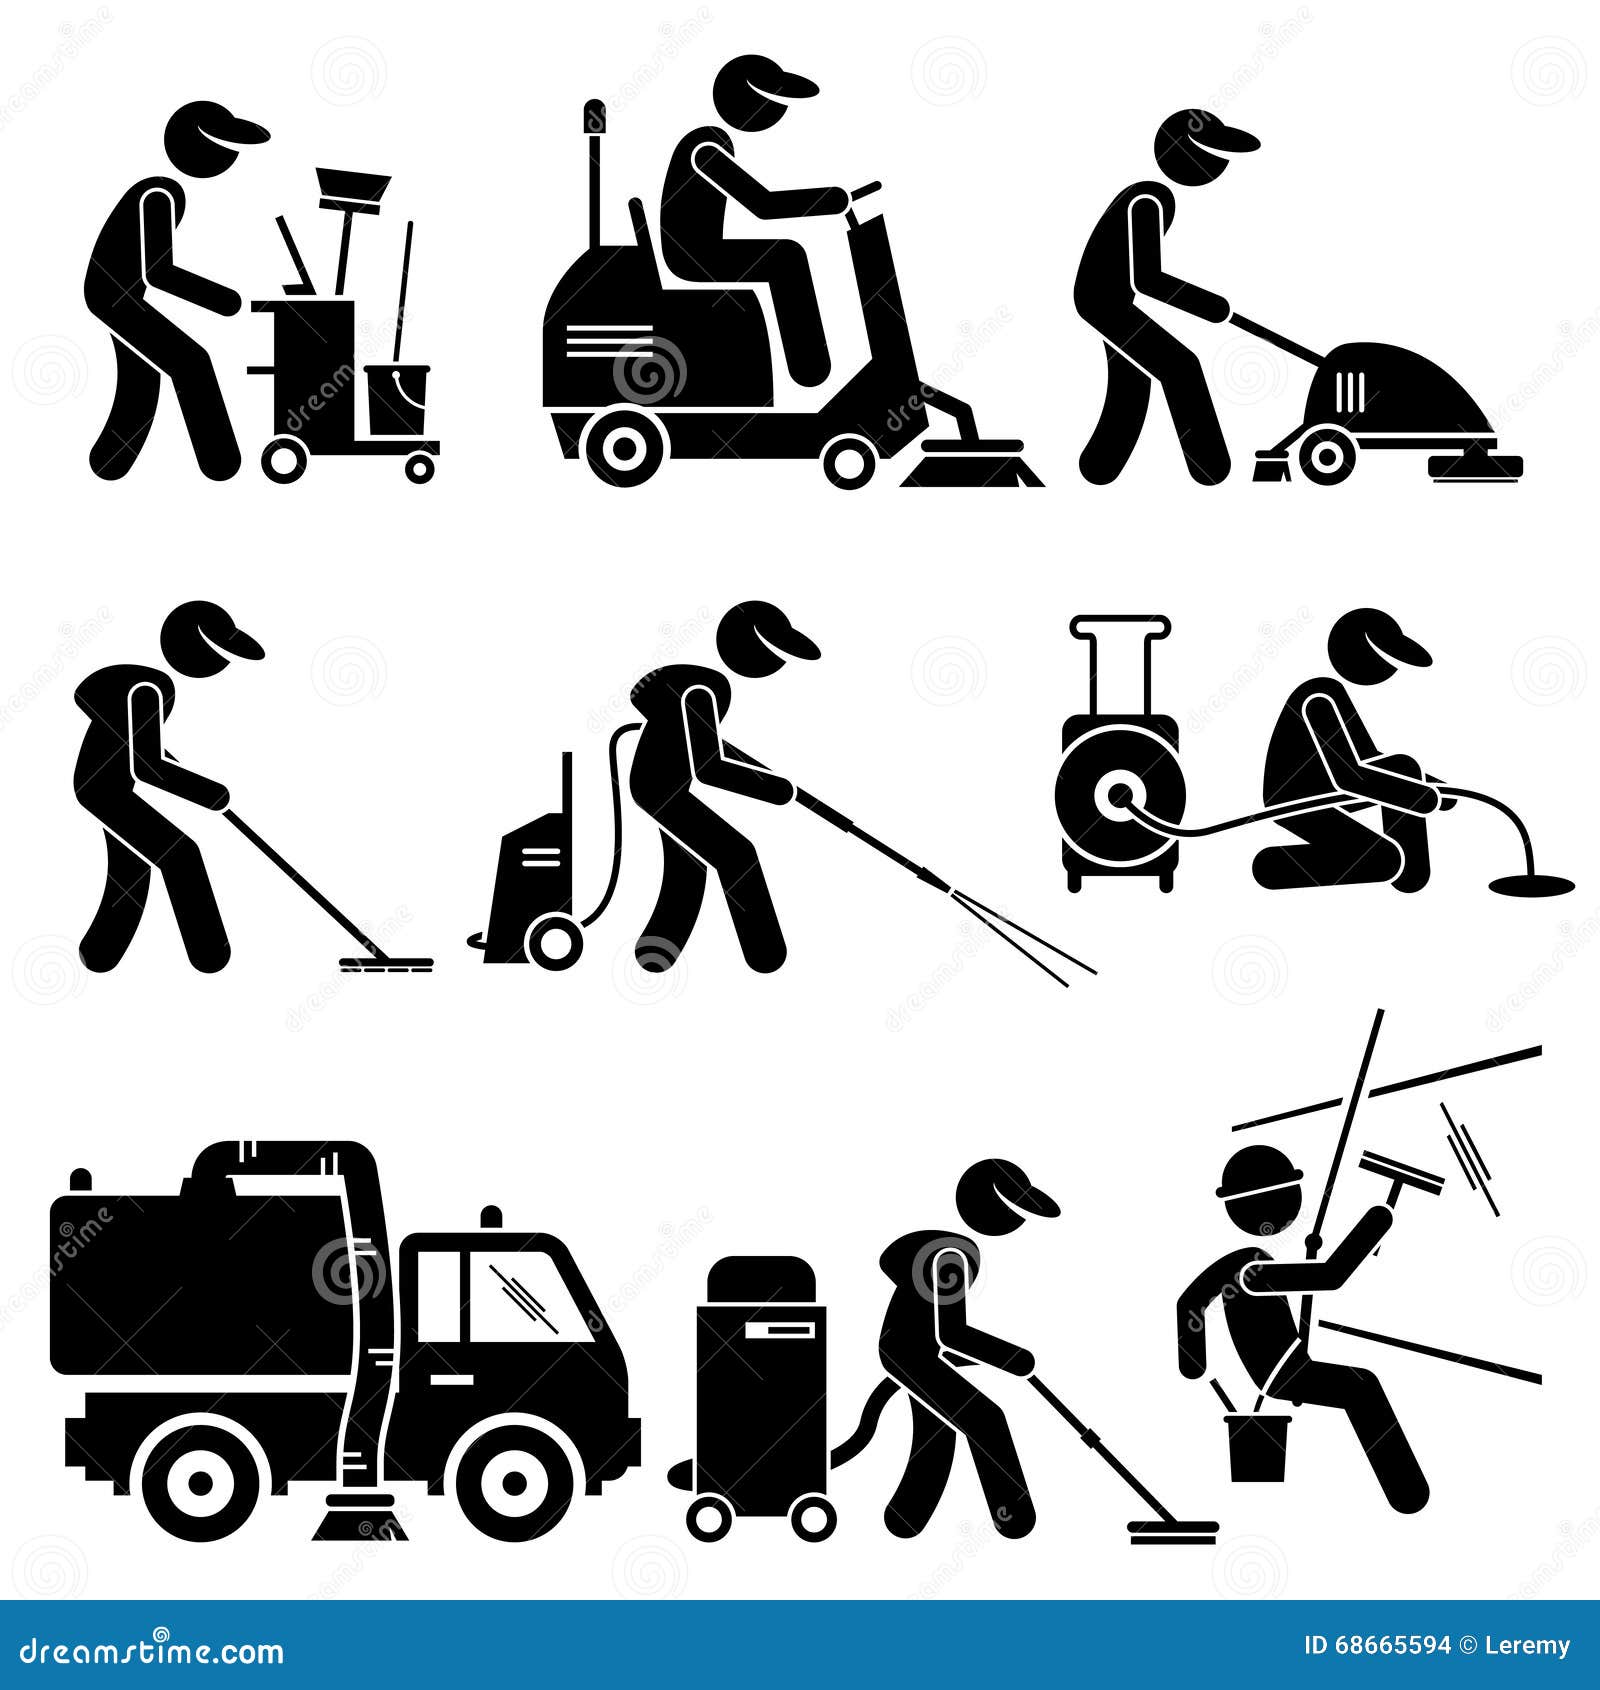 industrial worker clipart - photo #3